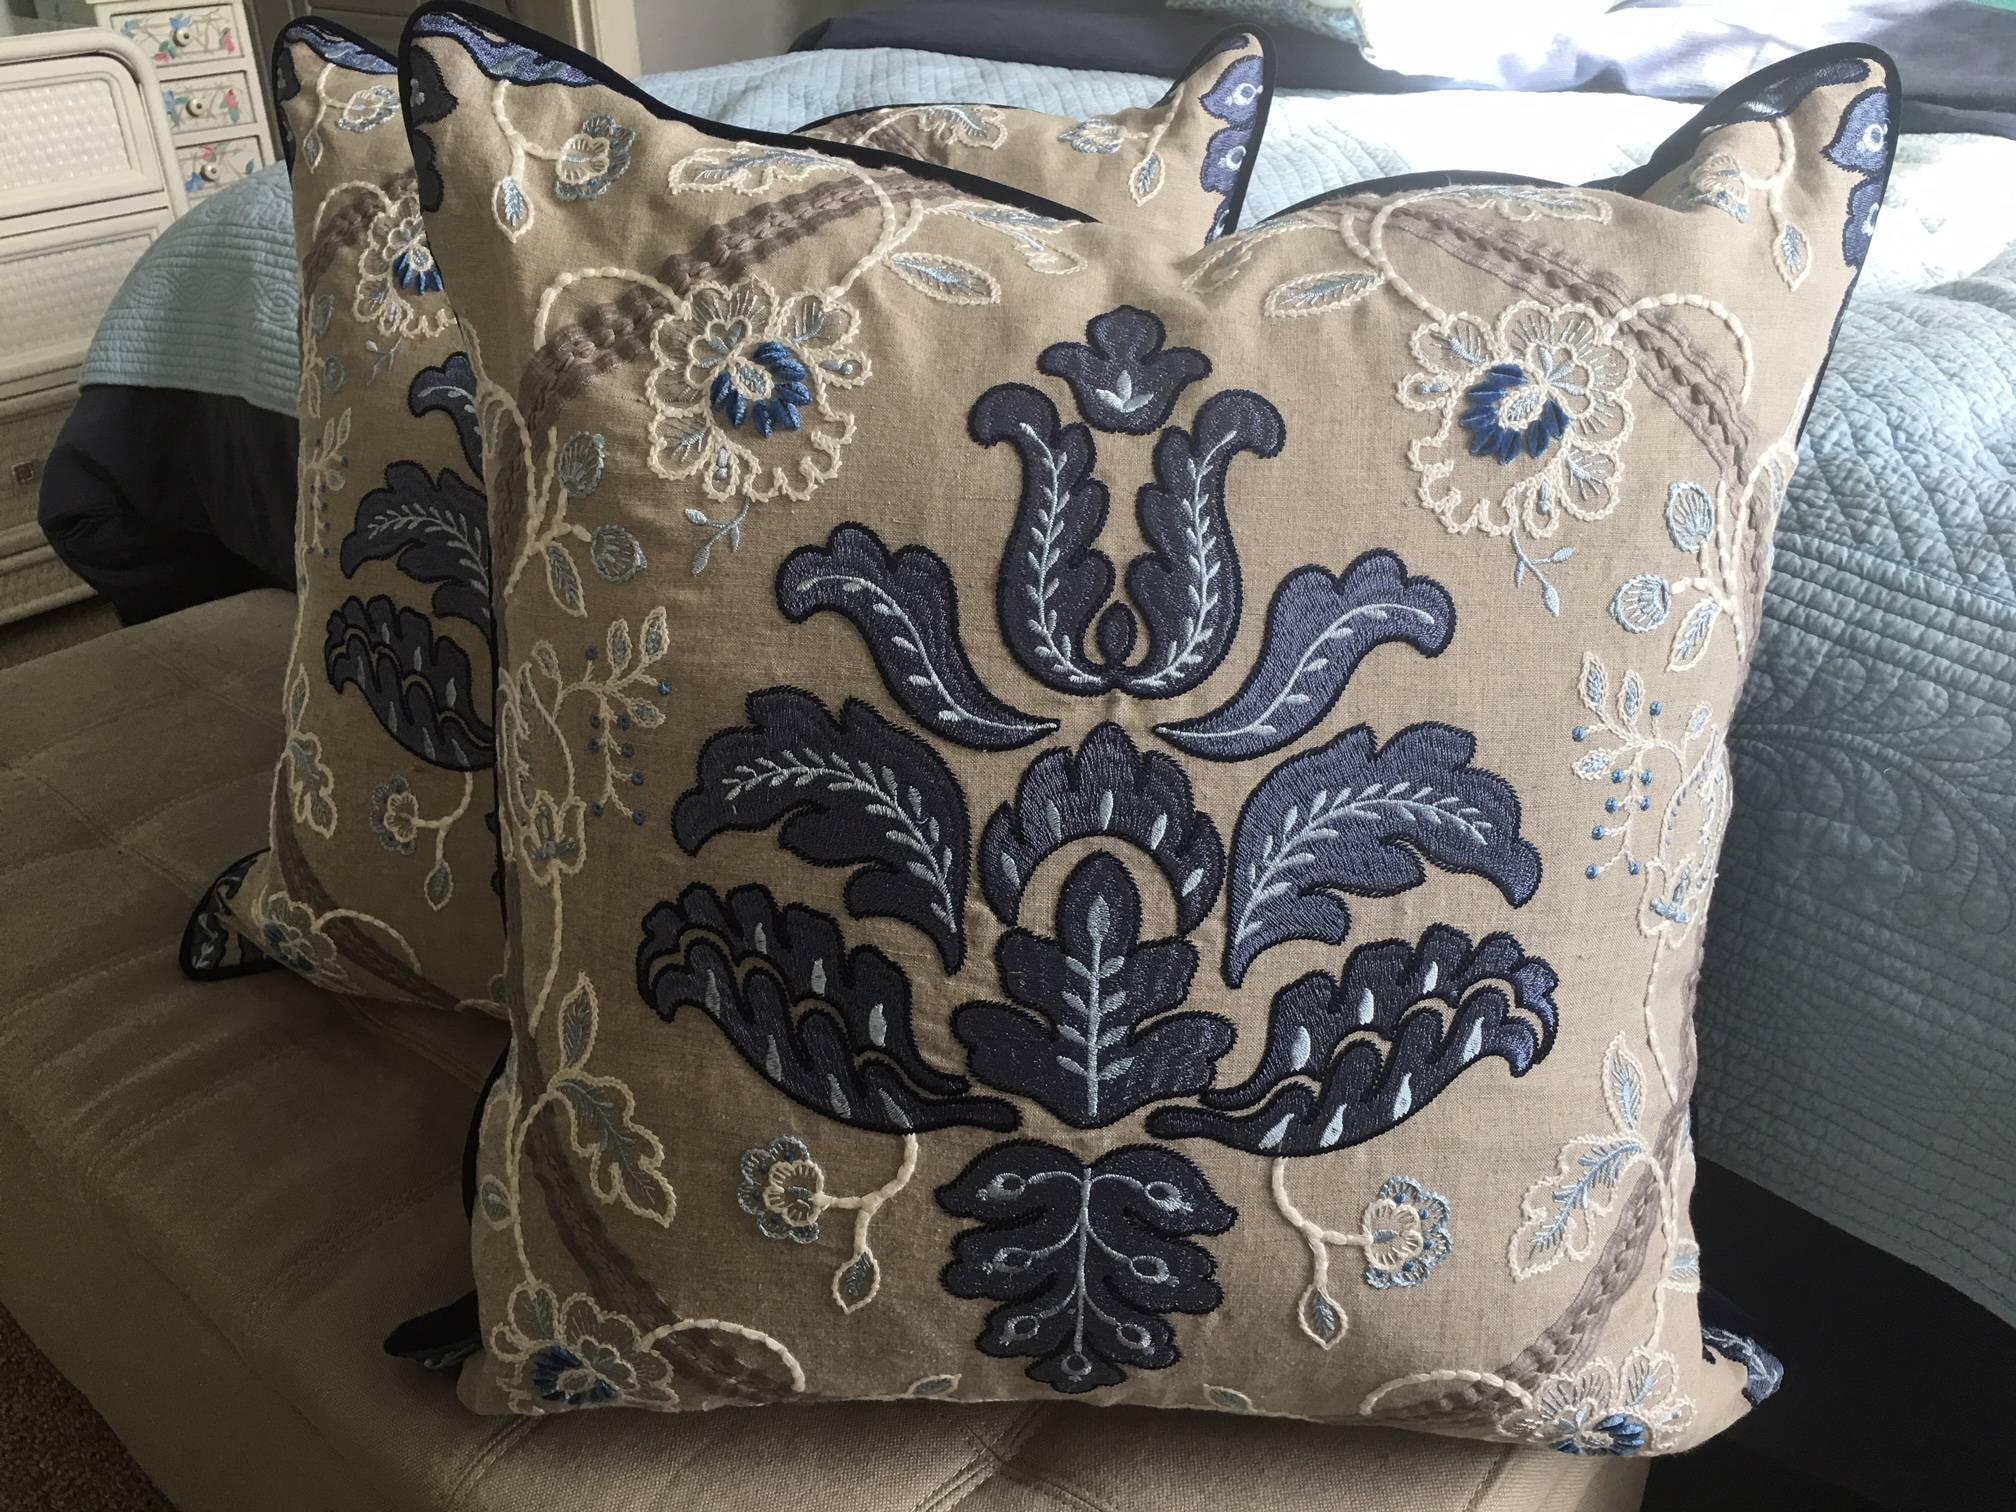 This custom-made, brand new, set of pillows features a beautiful embroidered Scalamandré textile backed with a rich deep blue velvet. The pillows are filled with down/feathers; an invisible zipper has been installed. The color in these luxurious 24